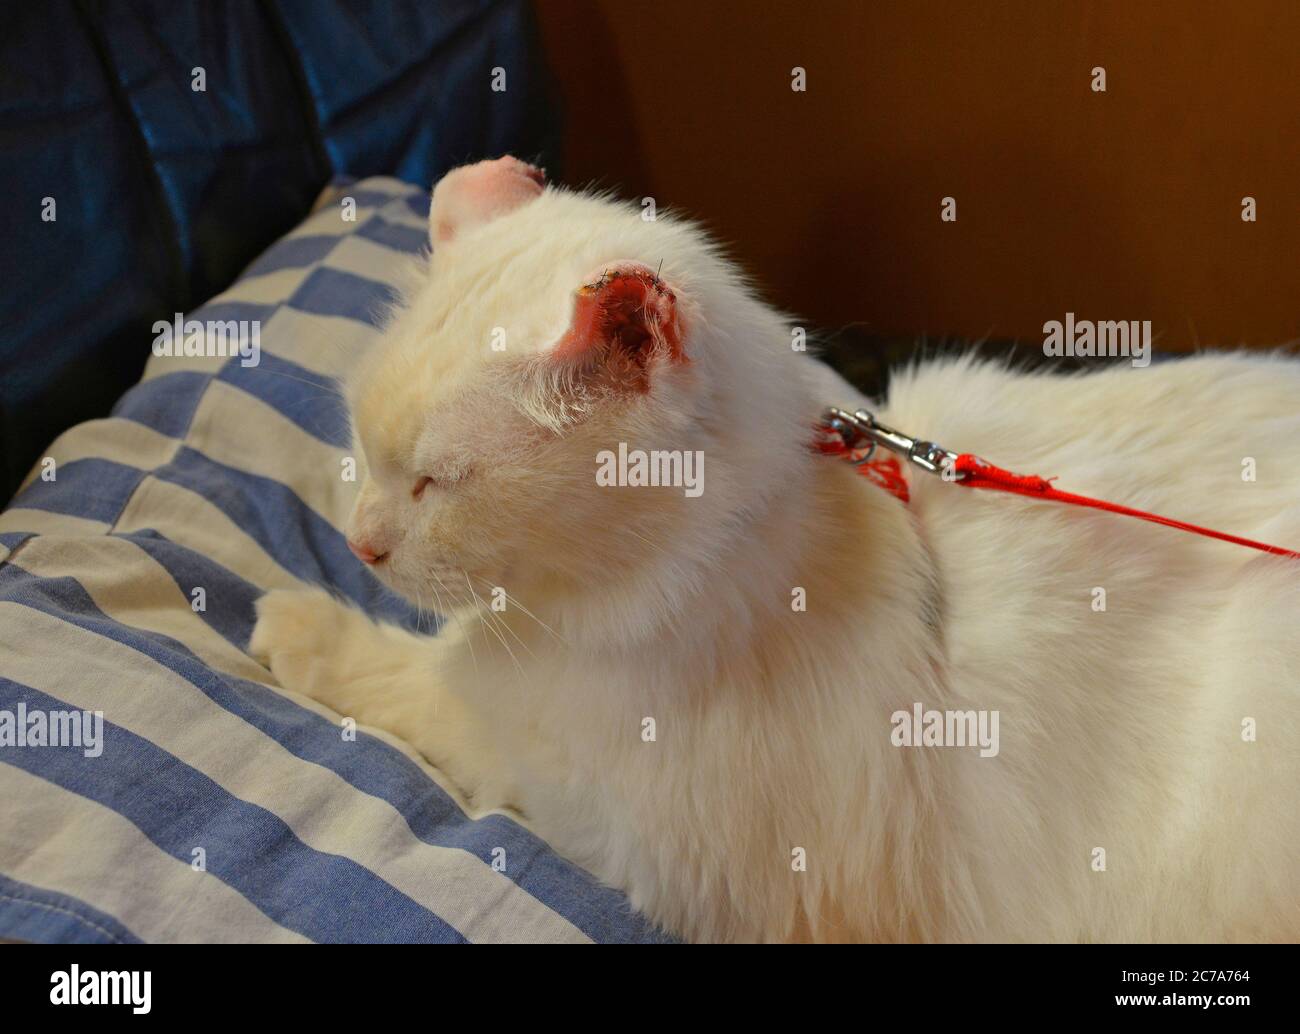 An 11 year old white male cat recovers from surgery at home for ear cancer on both ears. Half of his ear flapp (pinna or auricle) was removed Stock Photo